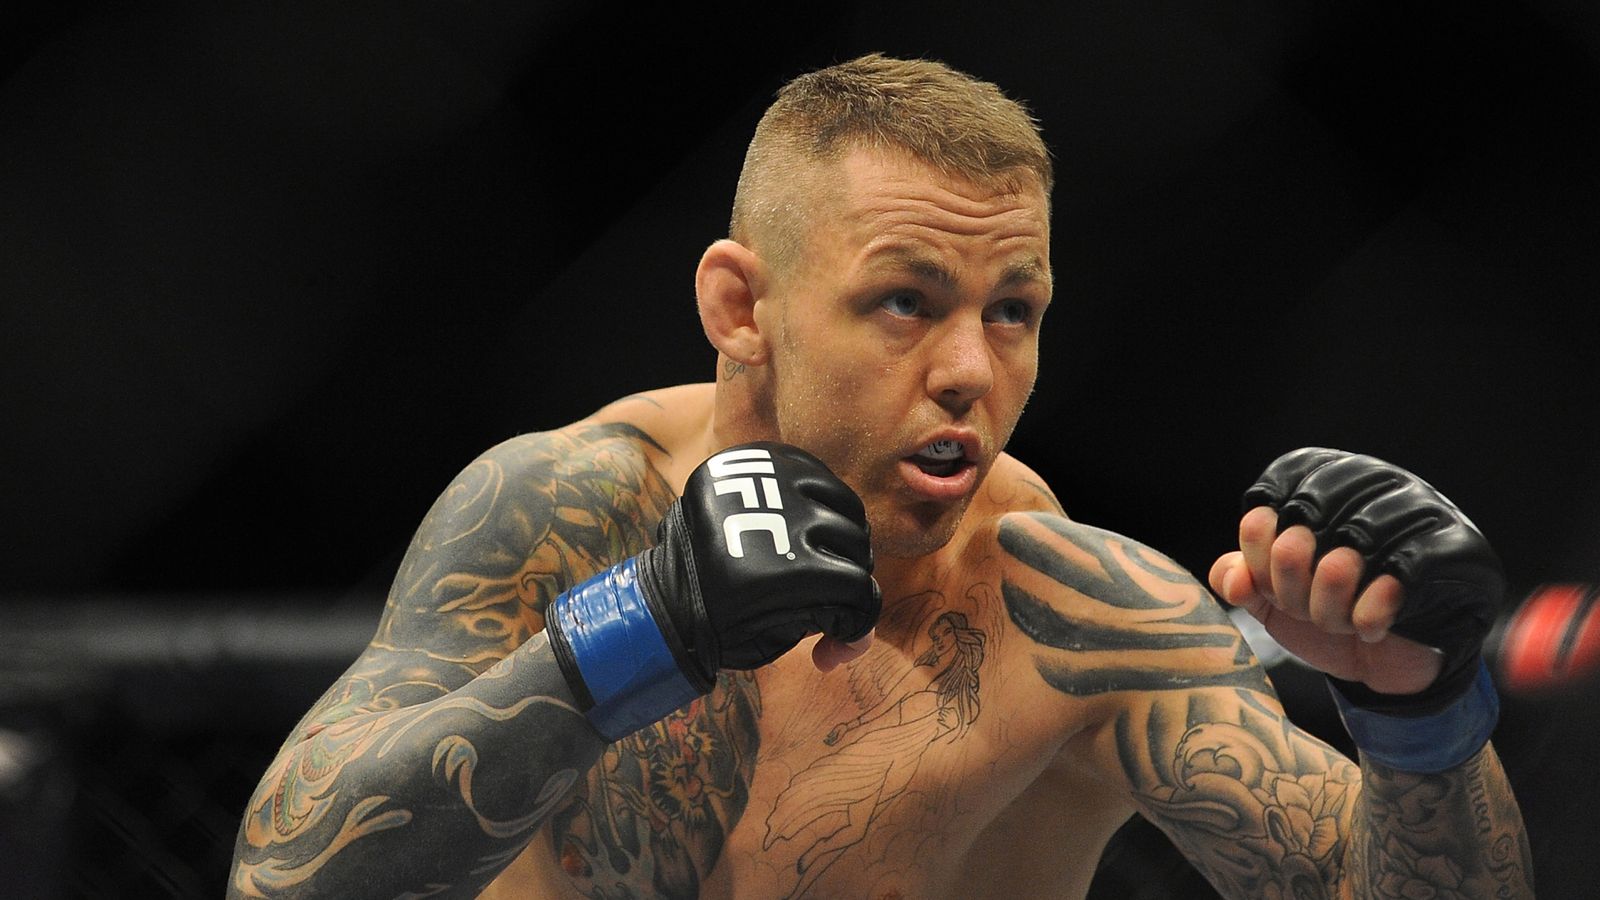 Top 10 ufc fighters tattoo ideas and inspiration